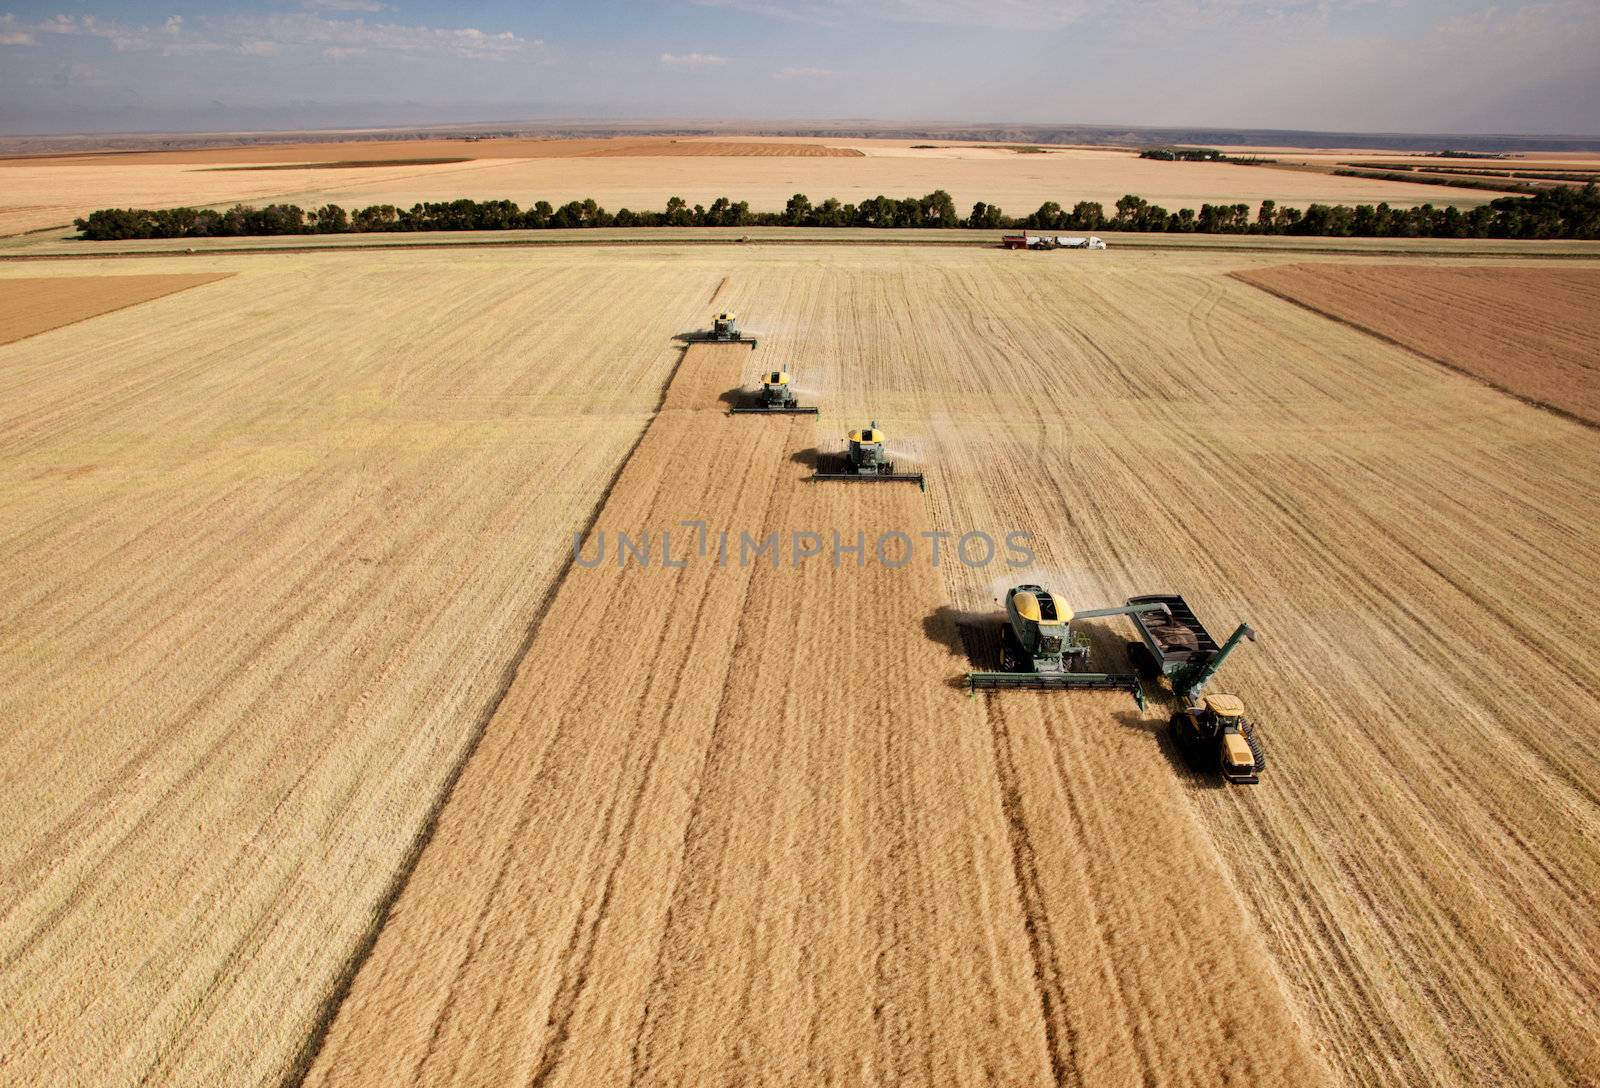 Four harvesters combing on a prairie landscape in formation